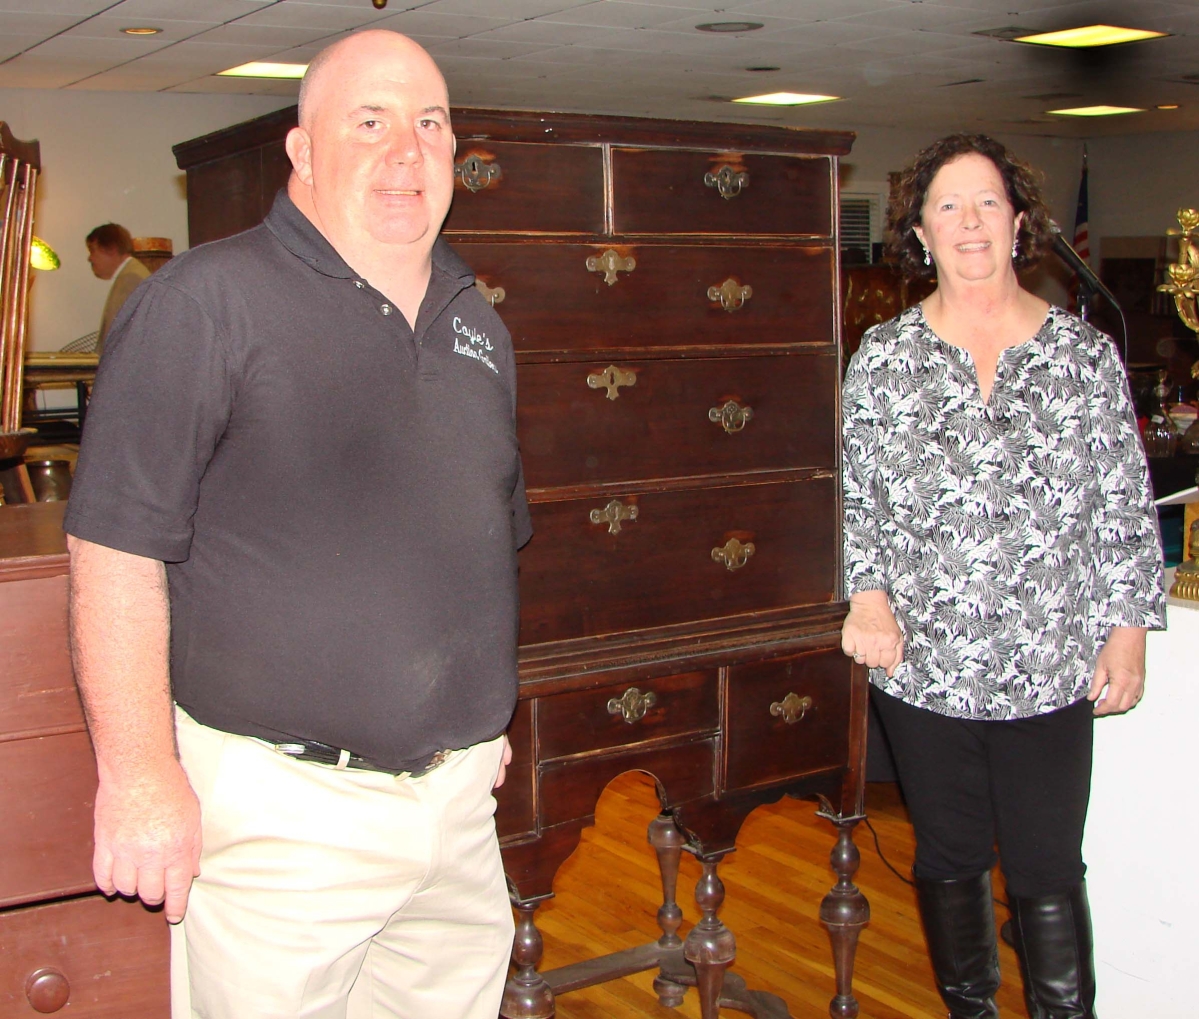 Mike Coyle and his sister Nancy Wyman, run Coyle’s Auctions, which they started over 30 years ago with their parents.